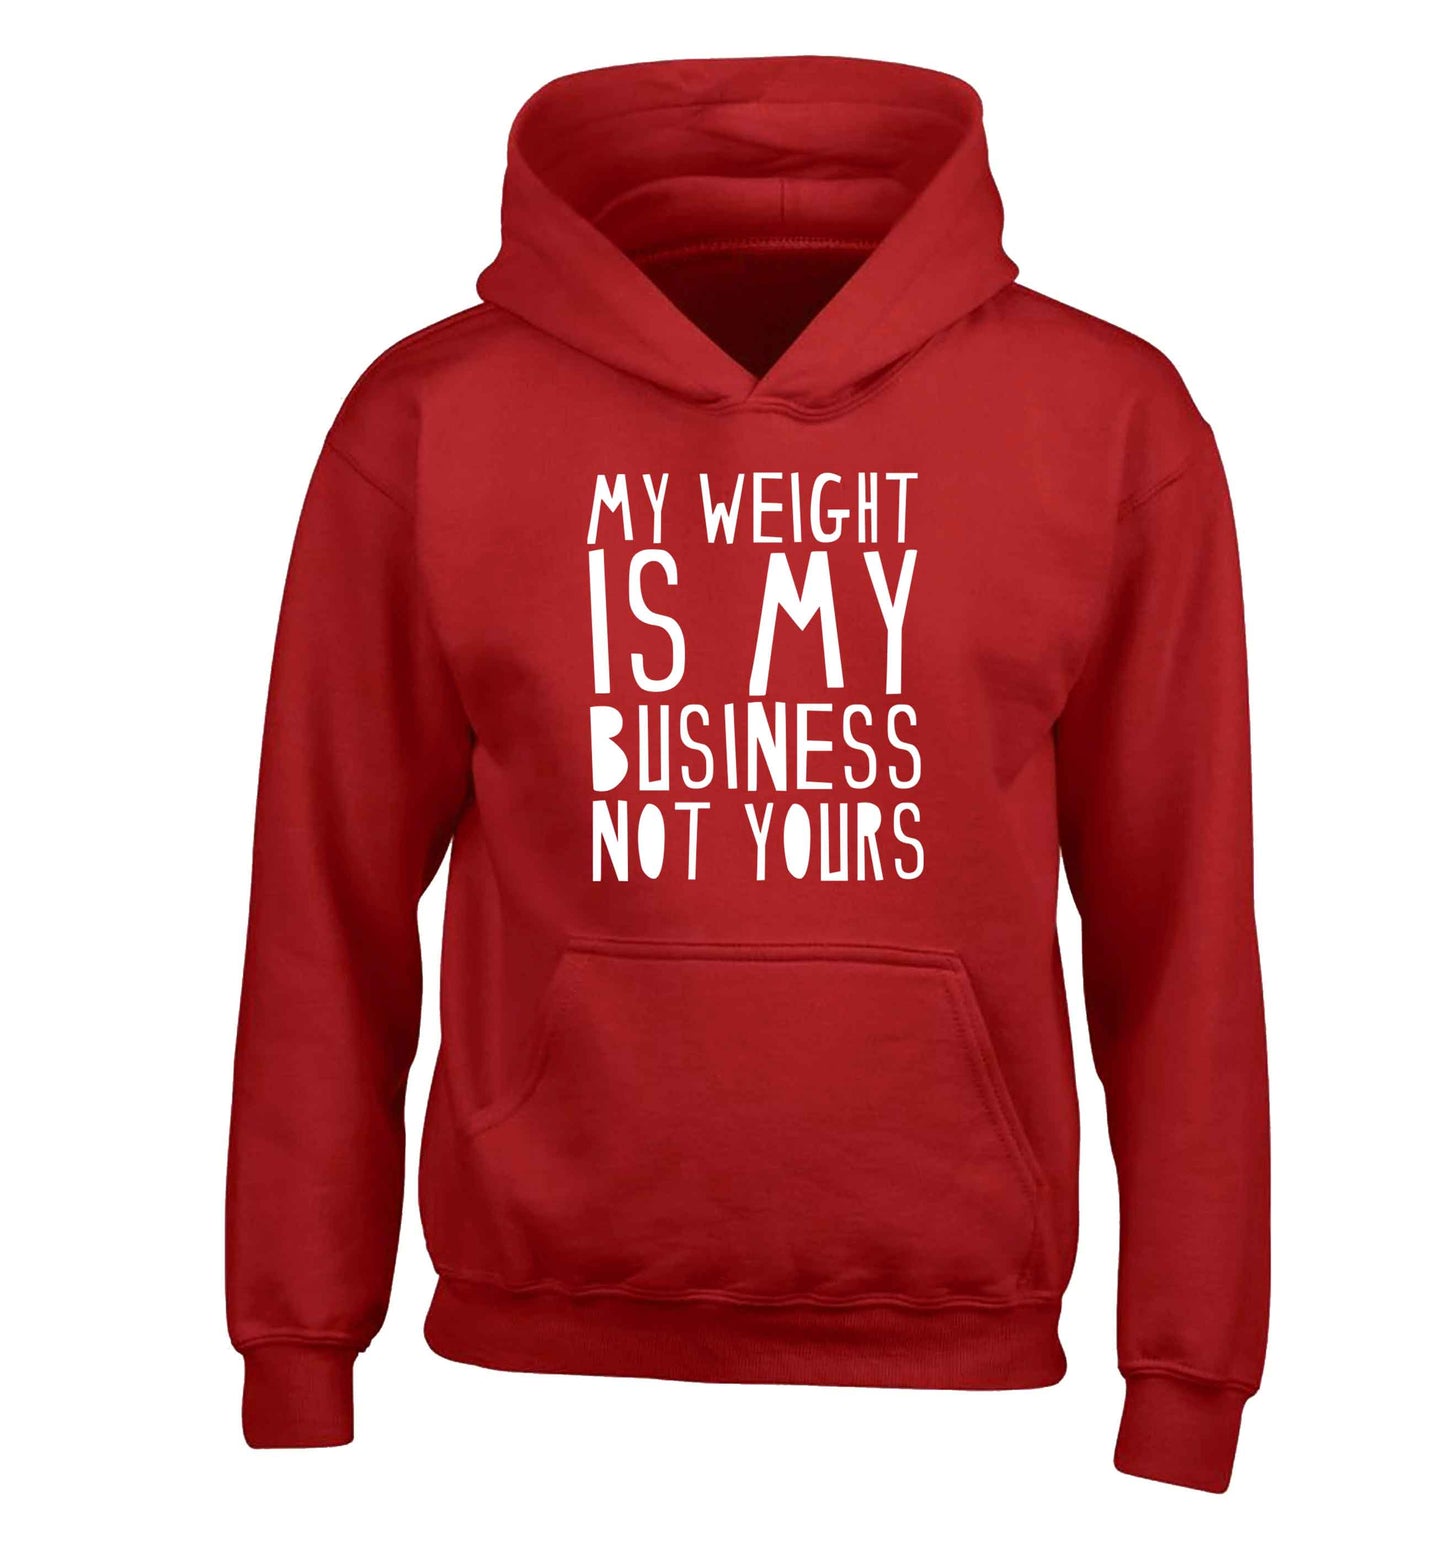 My weight is my business not yours children's red hoodie 12-13 Years